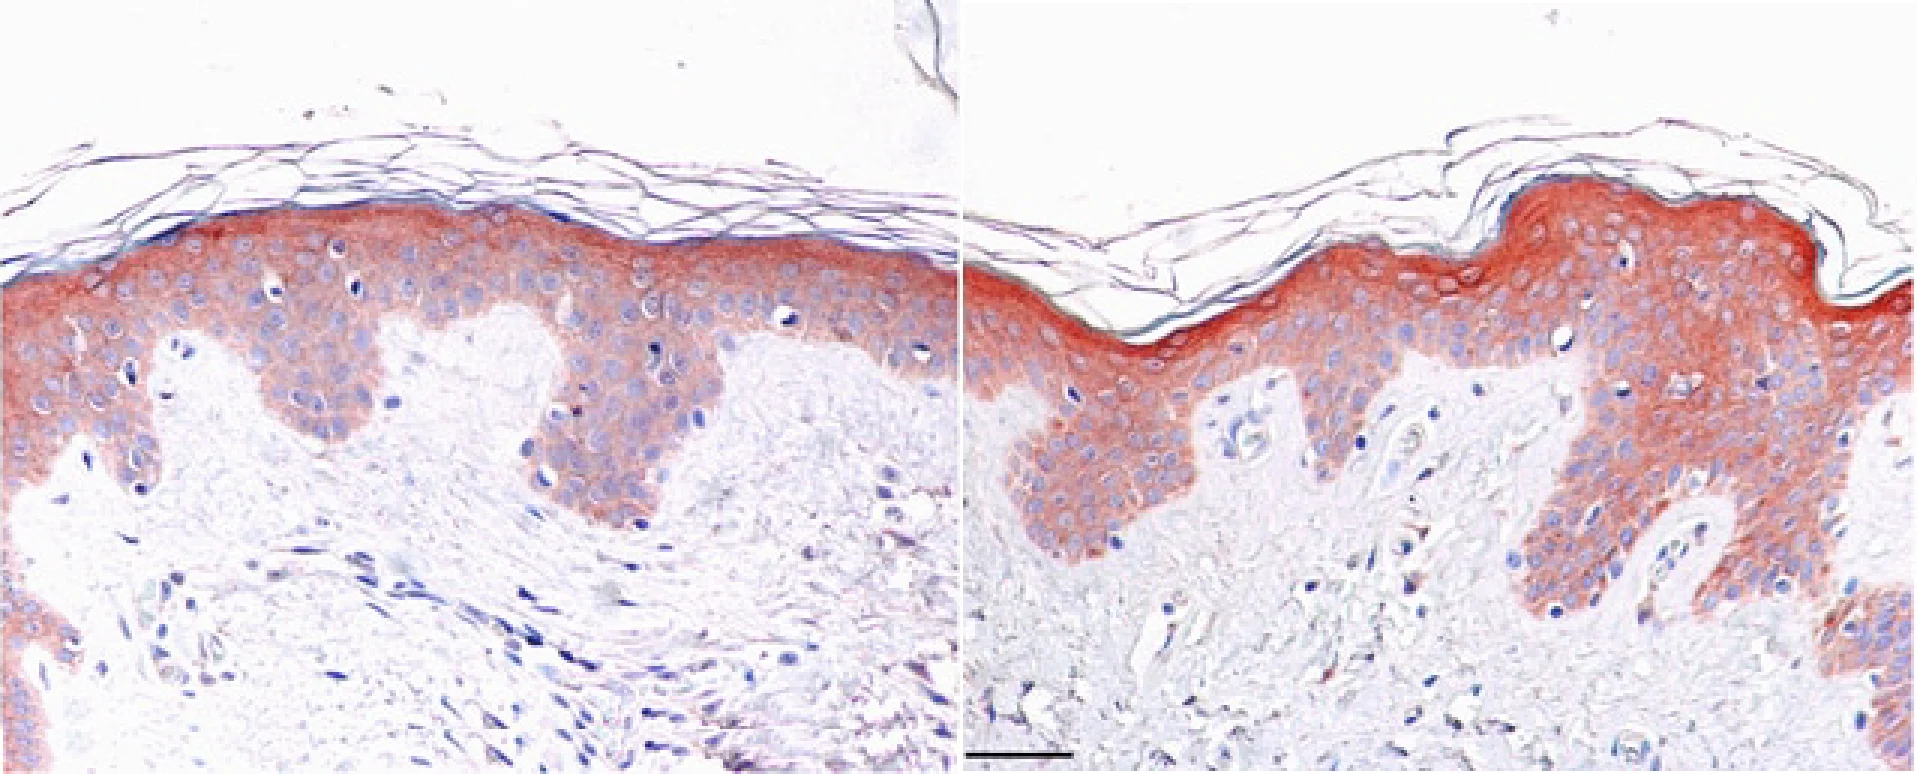 Increase in epidermal thickness is observed from left to right with continued use of the serum